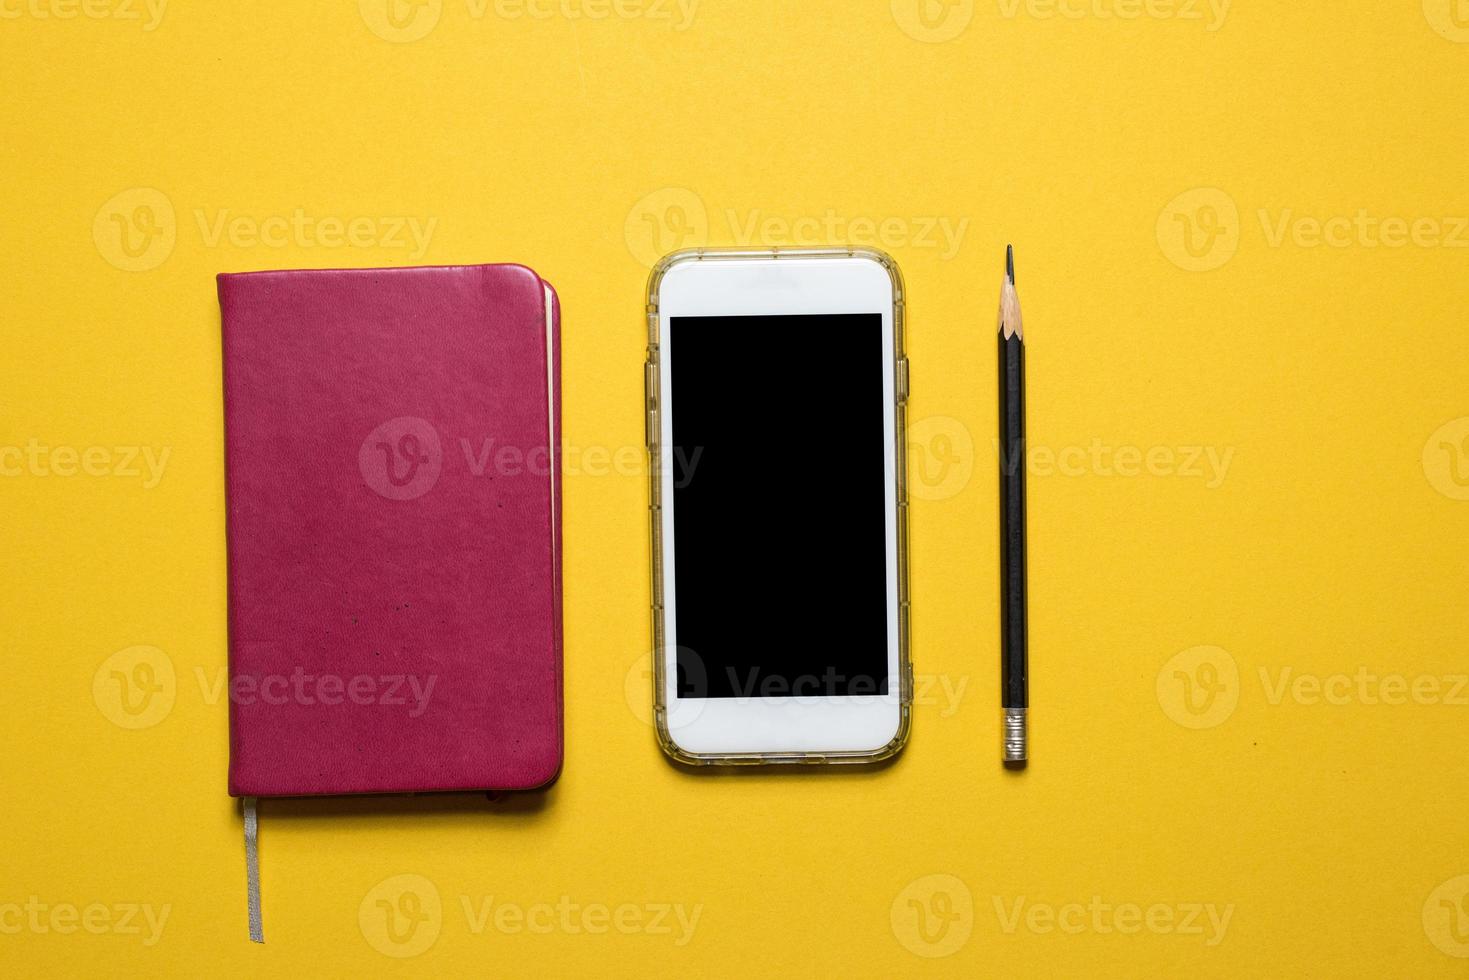 Phones, communication devices placed on a yellow background Technology concept With copy space photo